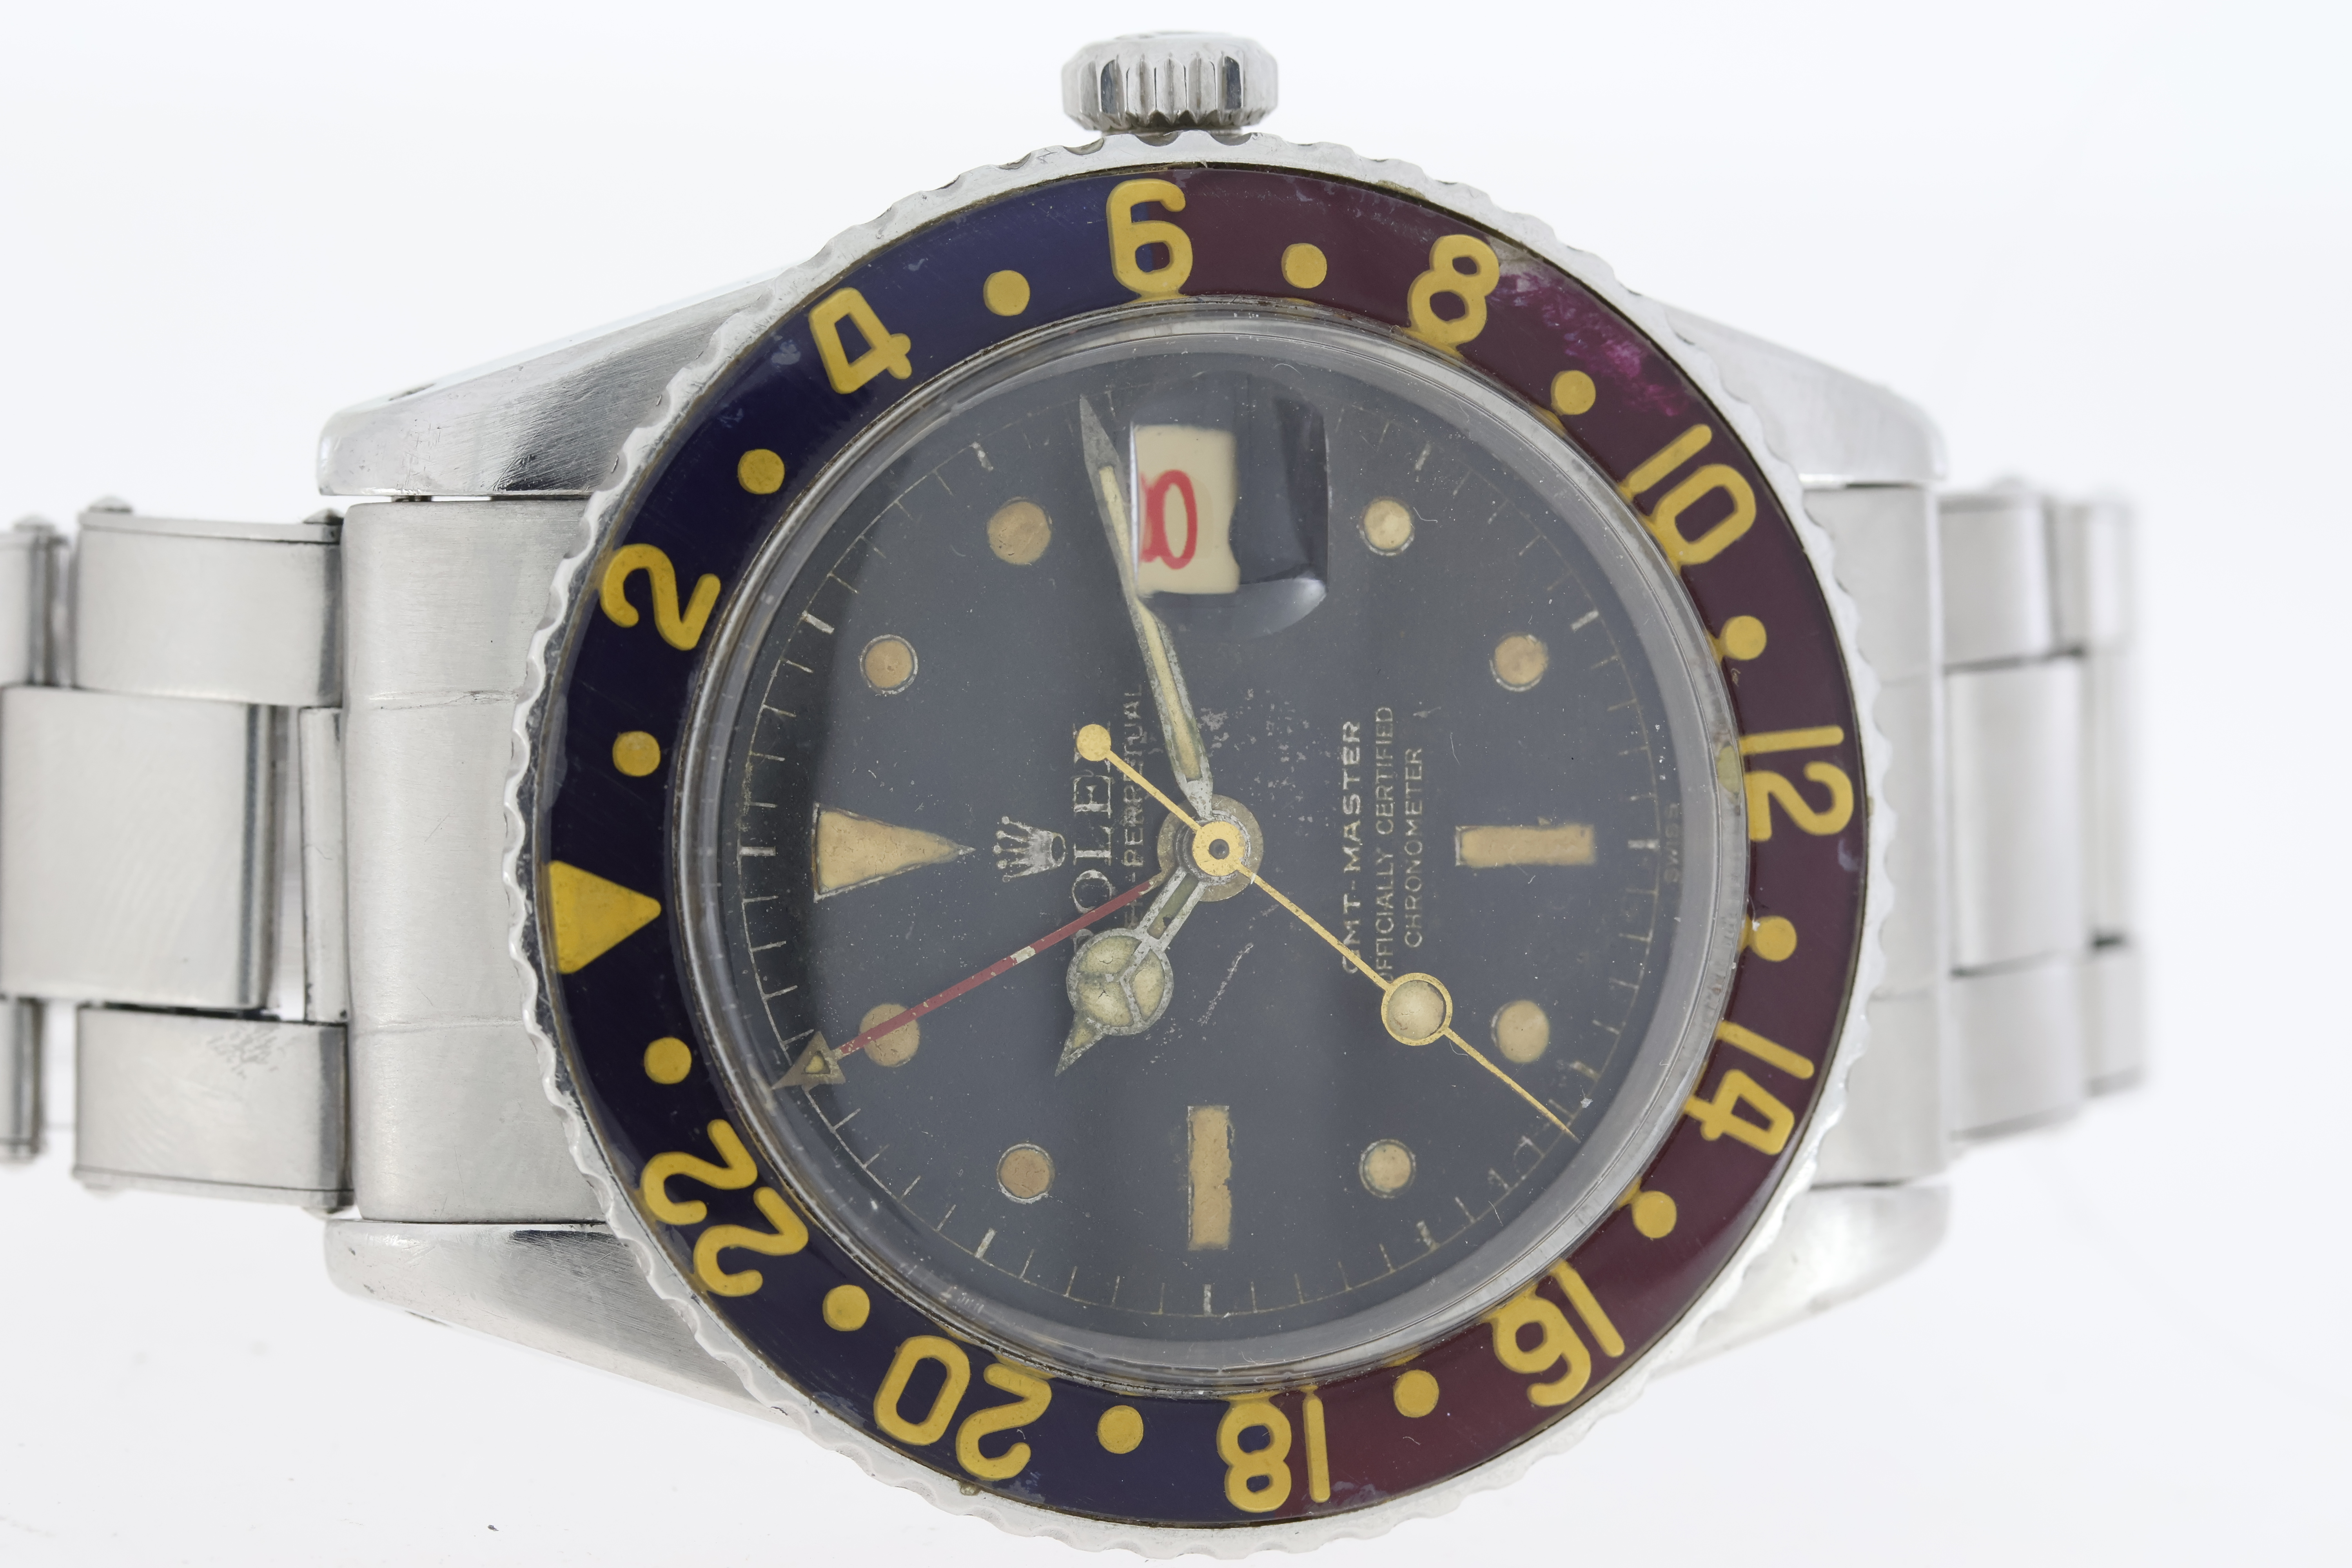 Rare Vintage Rolex GMT Master Reference 6542 'Pepsi' With Box Circa 1956 - Image 5 of 16